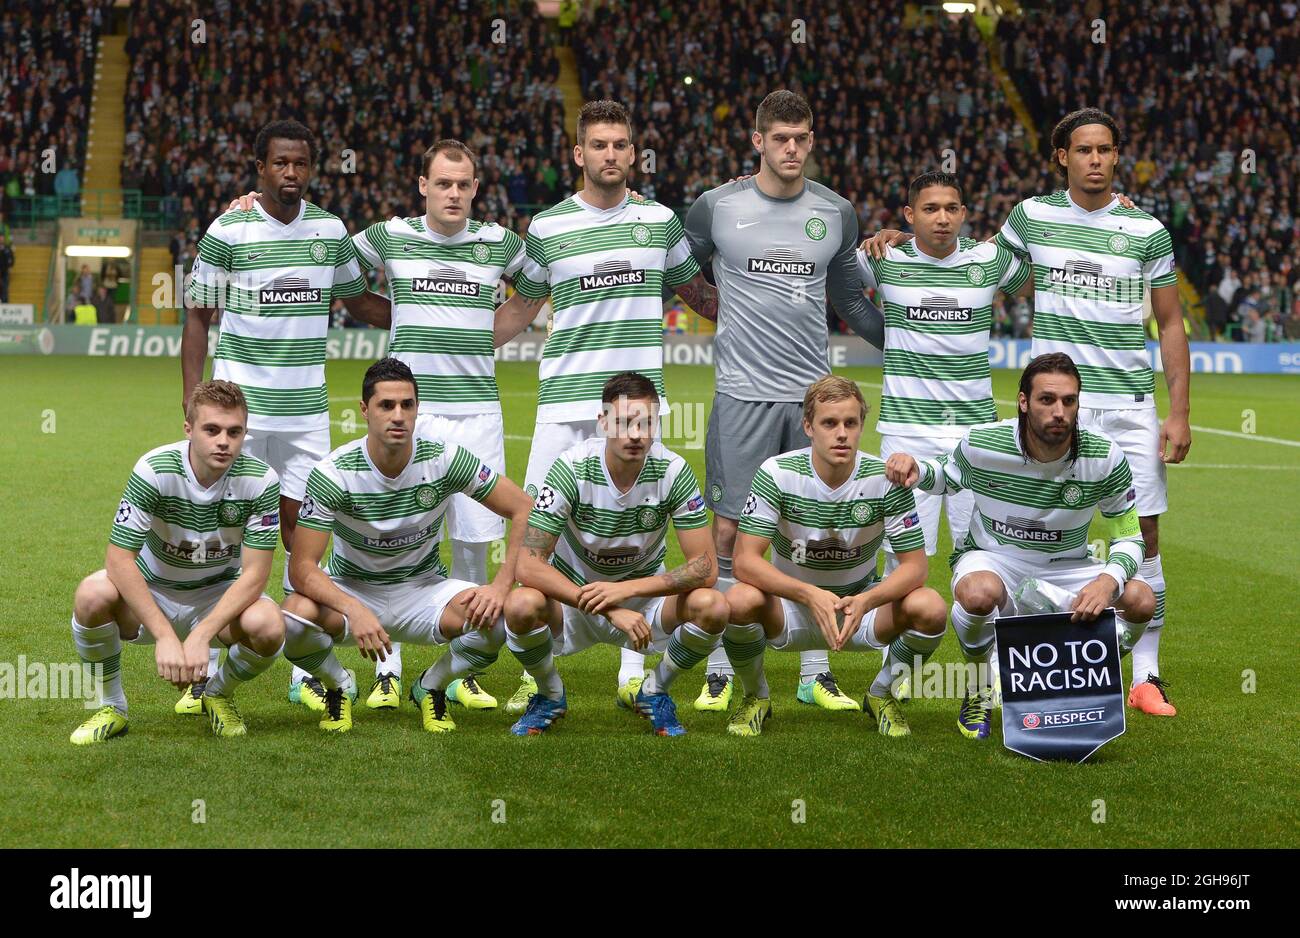 Celtic team group back row from left Efe Ambrose, Anthony Stokes, Charlie Mulgrew, Fraser Forster, Emilio Izaguirre and Virgil van Dijk of Celtic .Front row from left James Forrest, Biram Kayal, Mikael Lustig, Teemu Pukki and Georgios Samaras of Celtic during UEFA Champions League Group H match between Celtic and Ajax at Celtic Park Stadium on Oct. 22, 2013, Glasgow, Scotland, Stock Photo